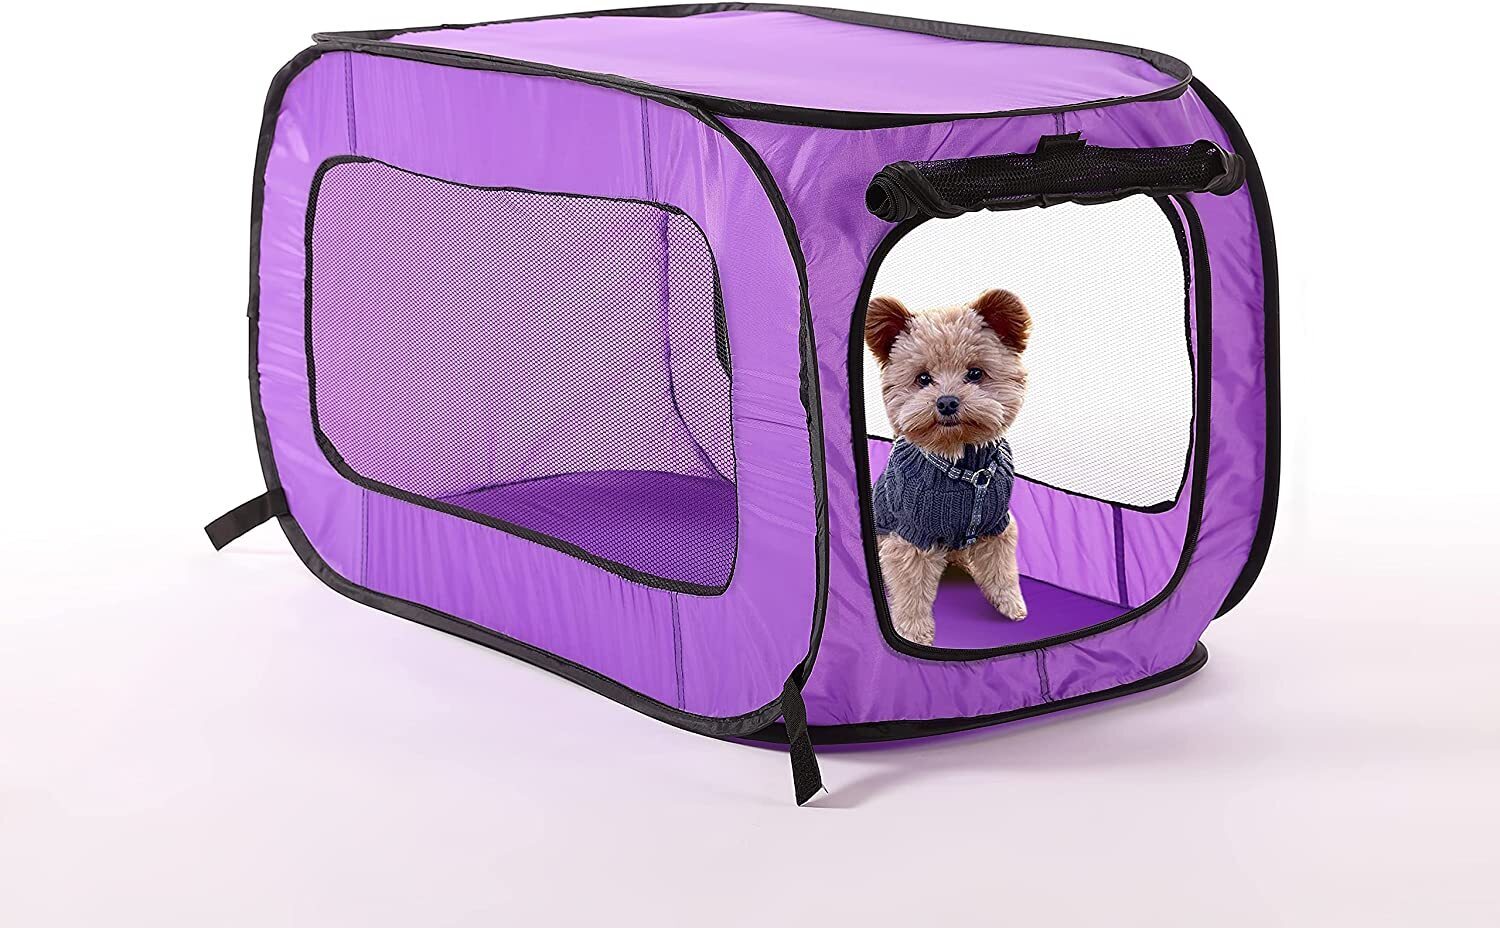 Basic purple dog crate for travel